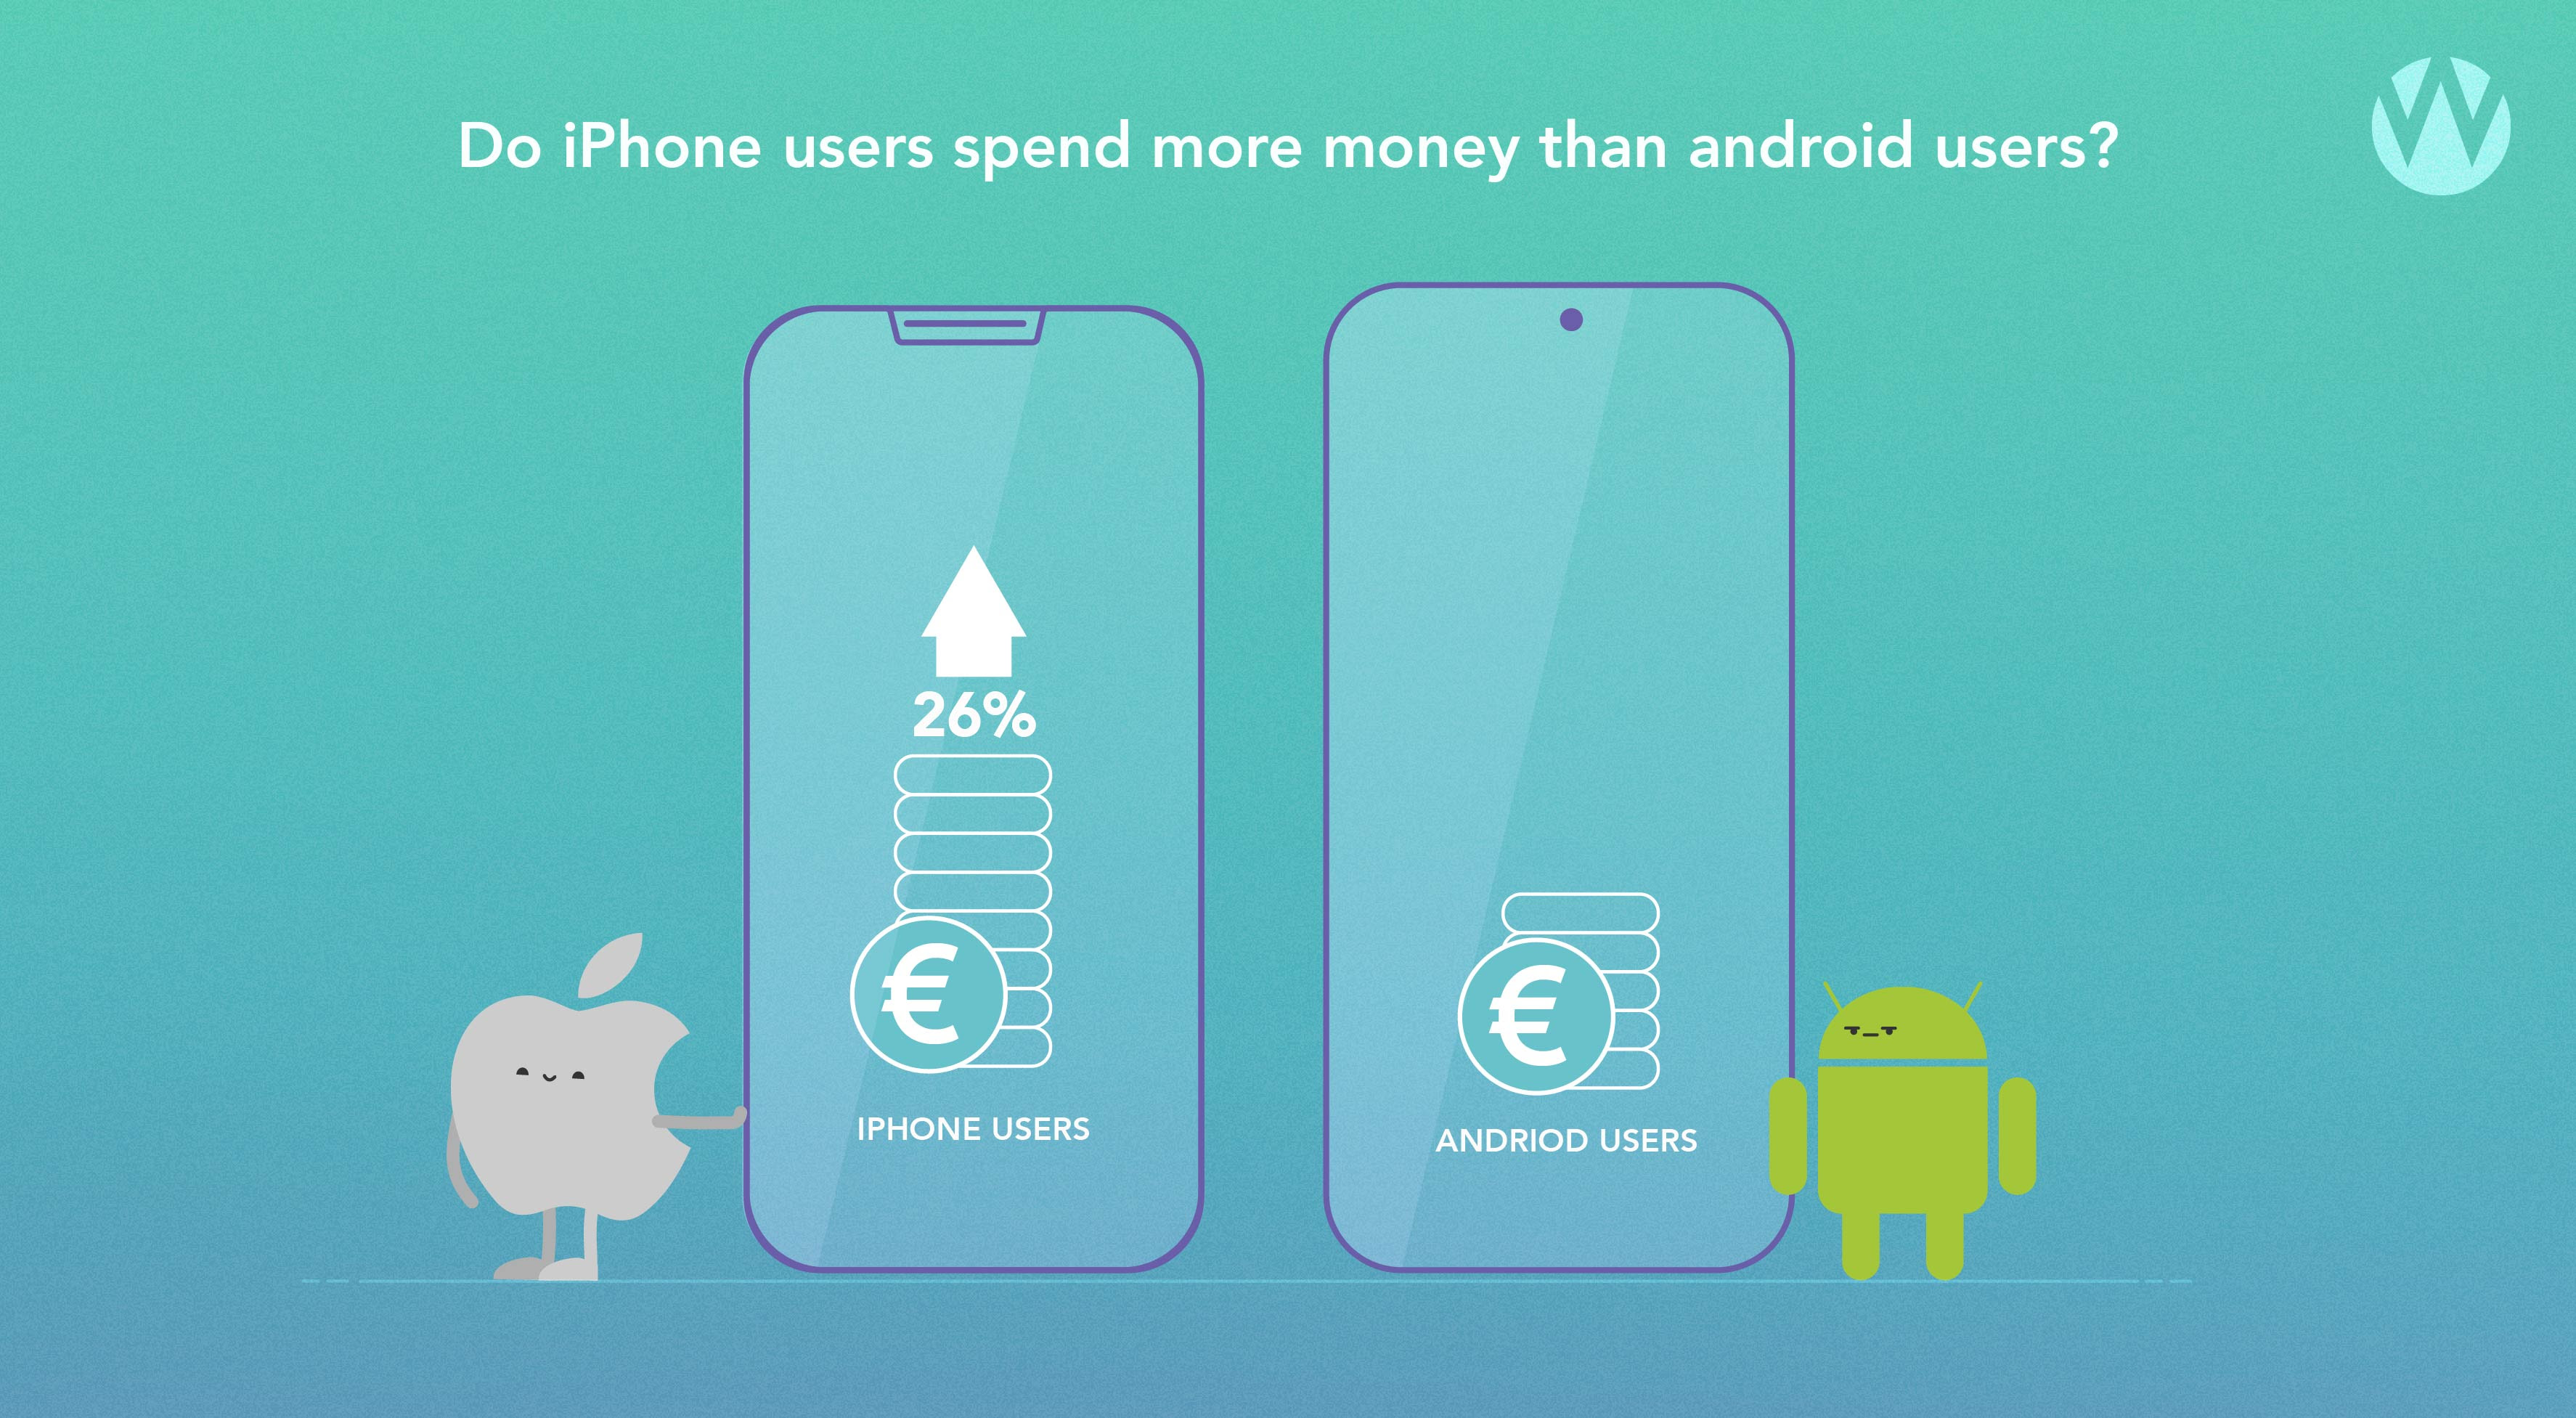 Battle of the Internet Giants: iPhone or Android, Which Users Spend More?